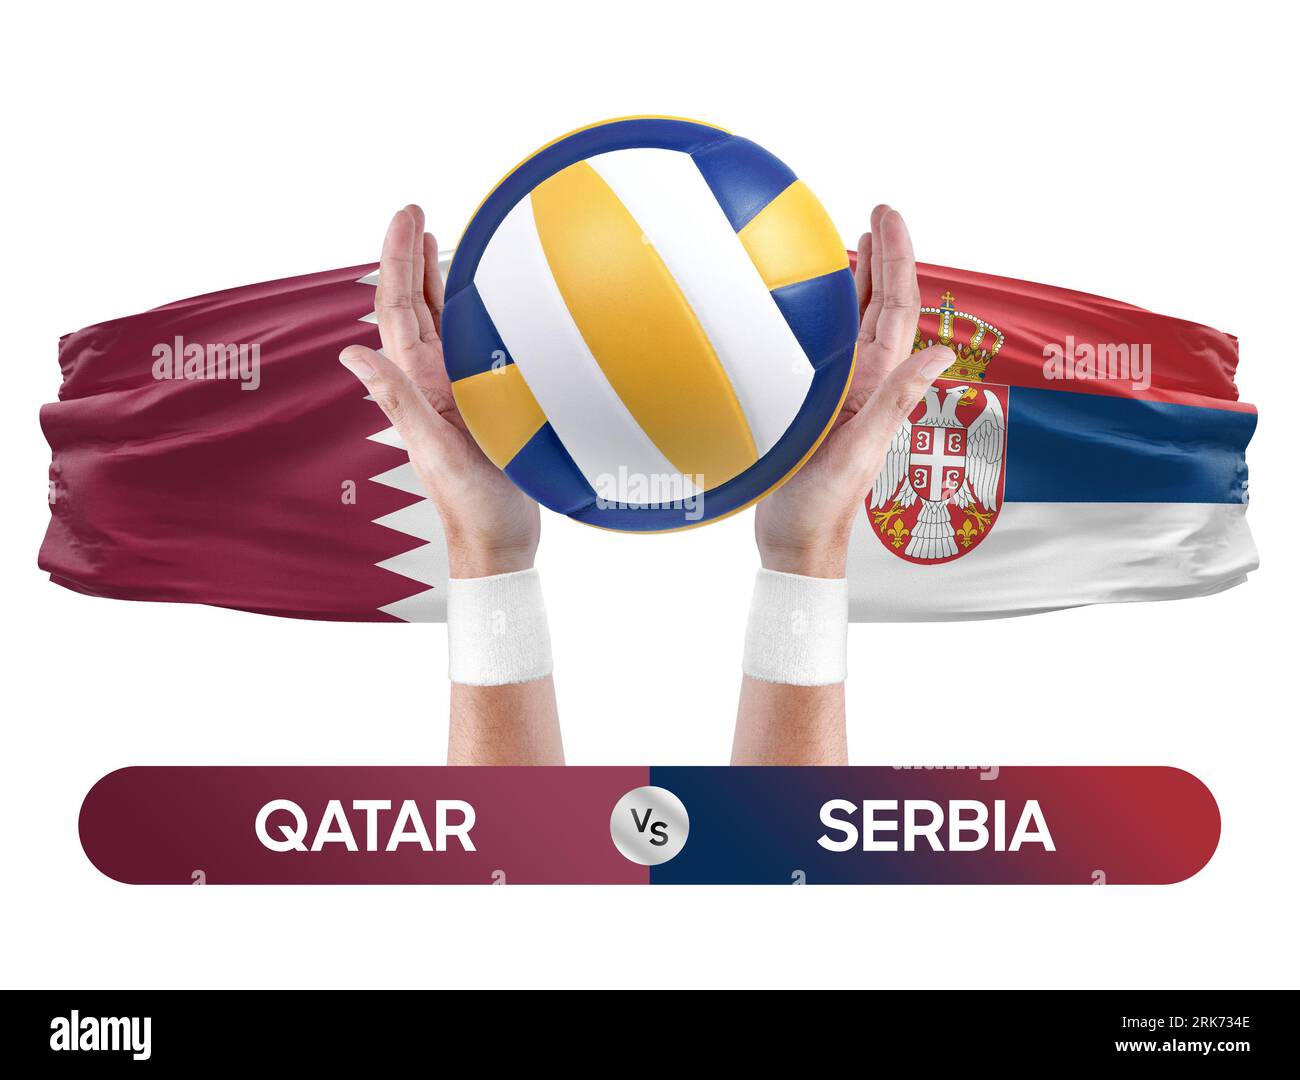 Qatar vs Serbia national teams volleyball volley ball match competition concept. Stock Photo